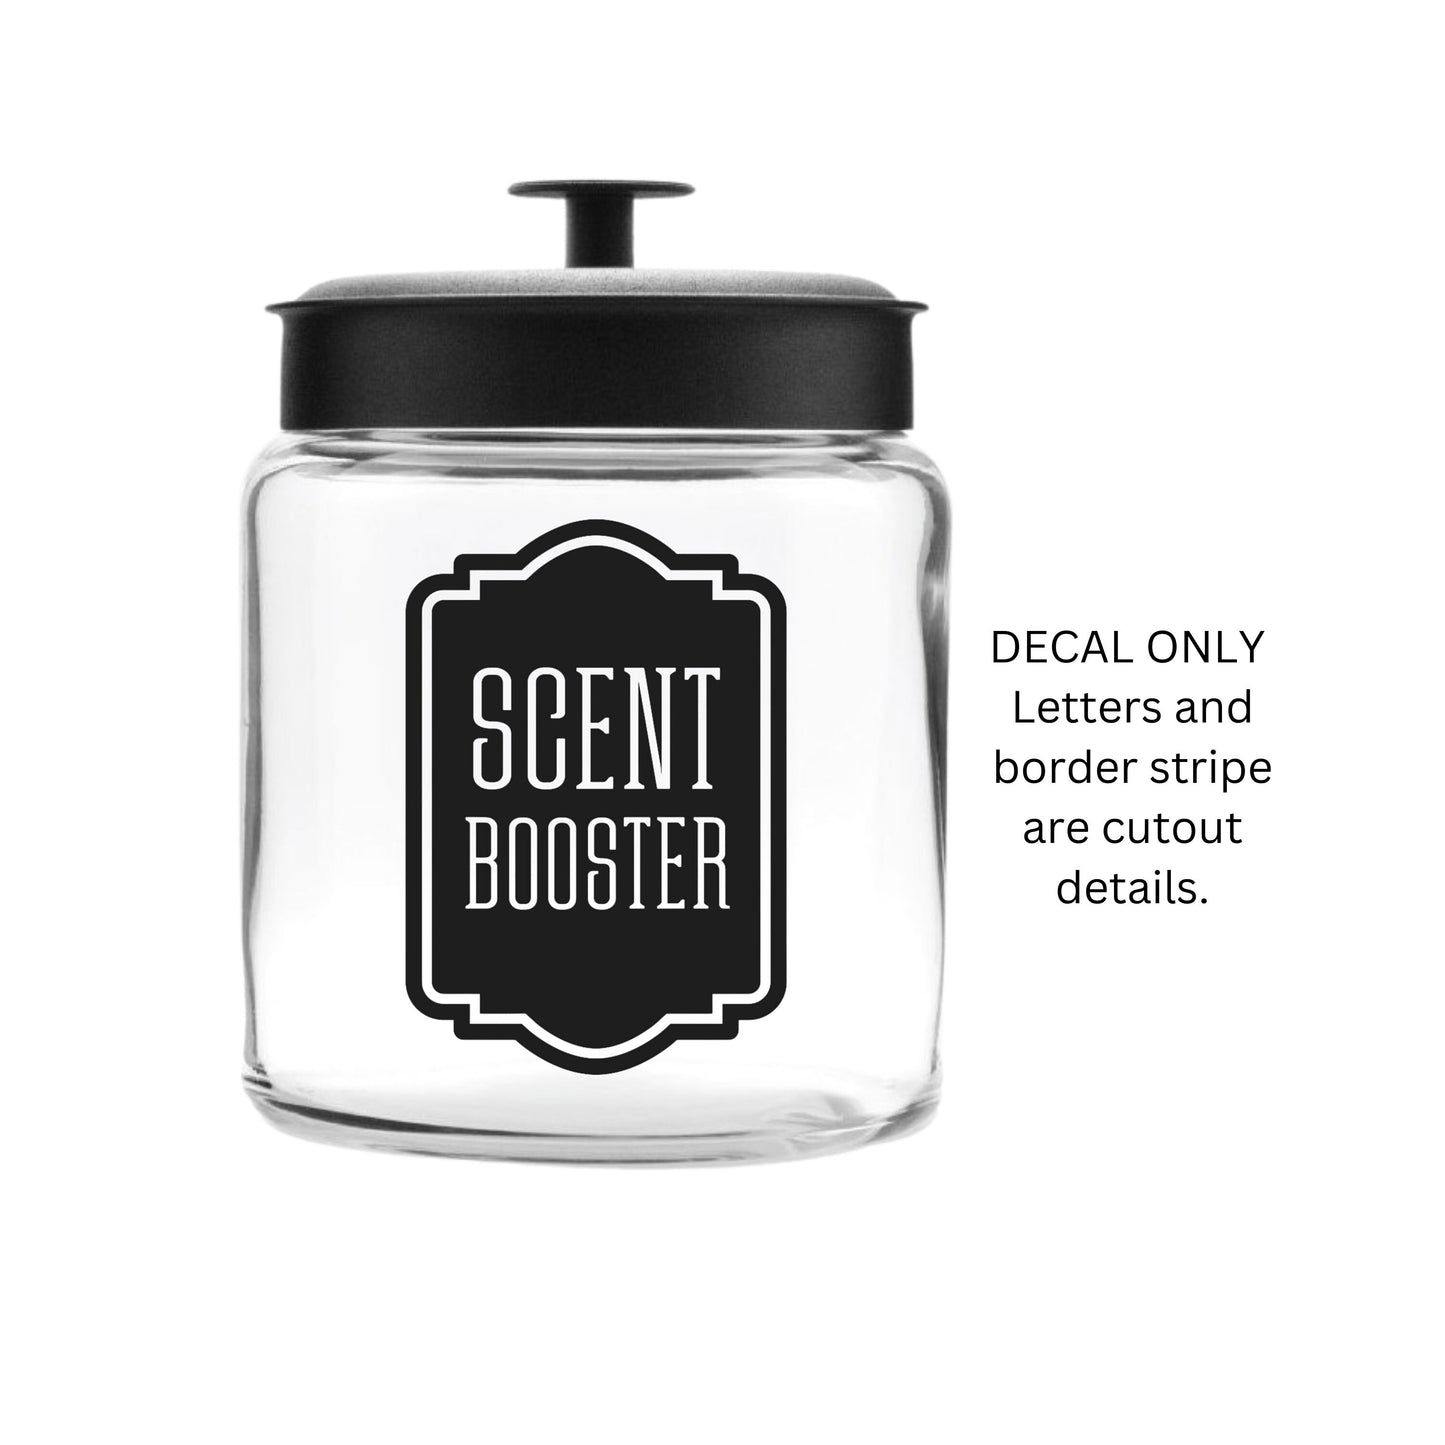 Scent Booster Decal, organized laundry room, cleaning products labels, container decal for laundry scent beads, DECAL ONLY